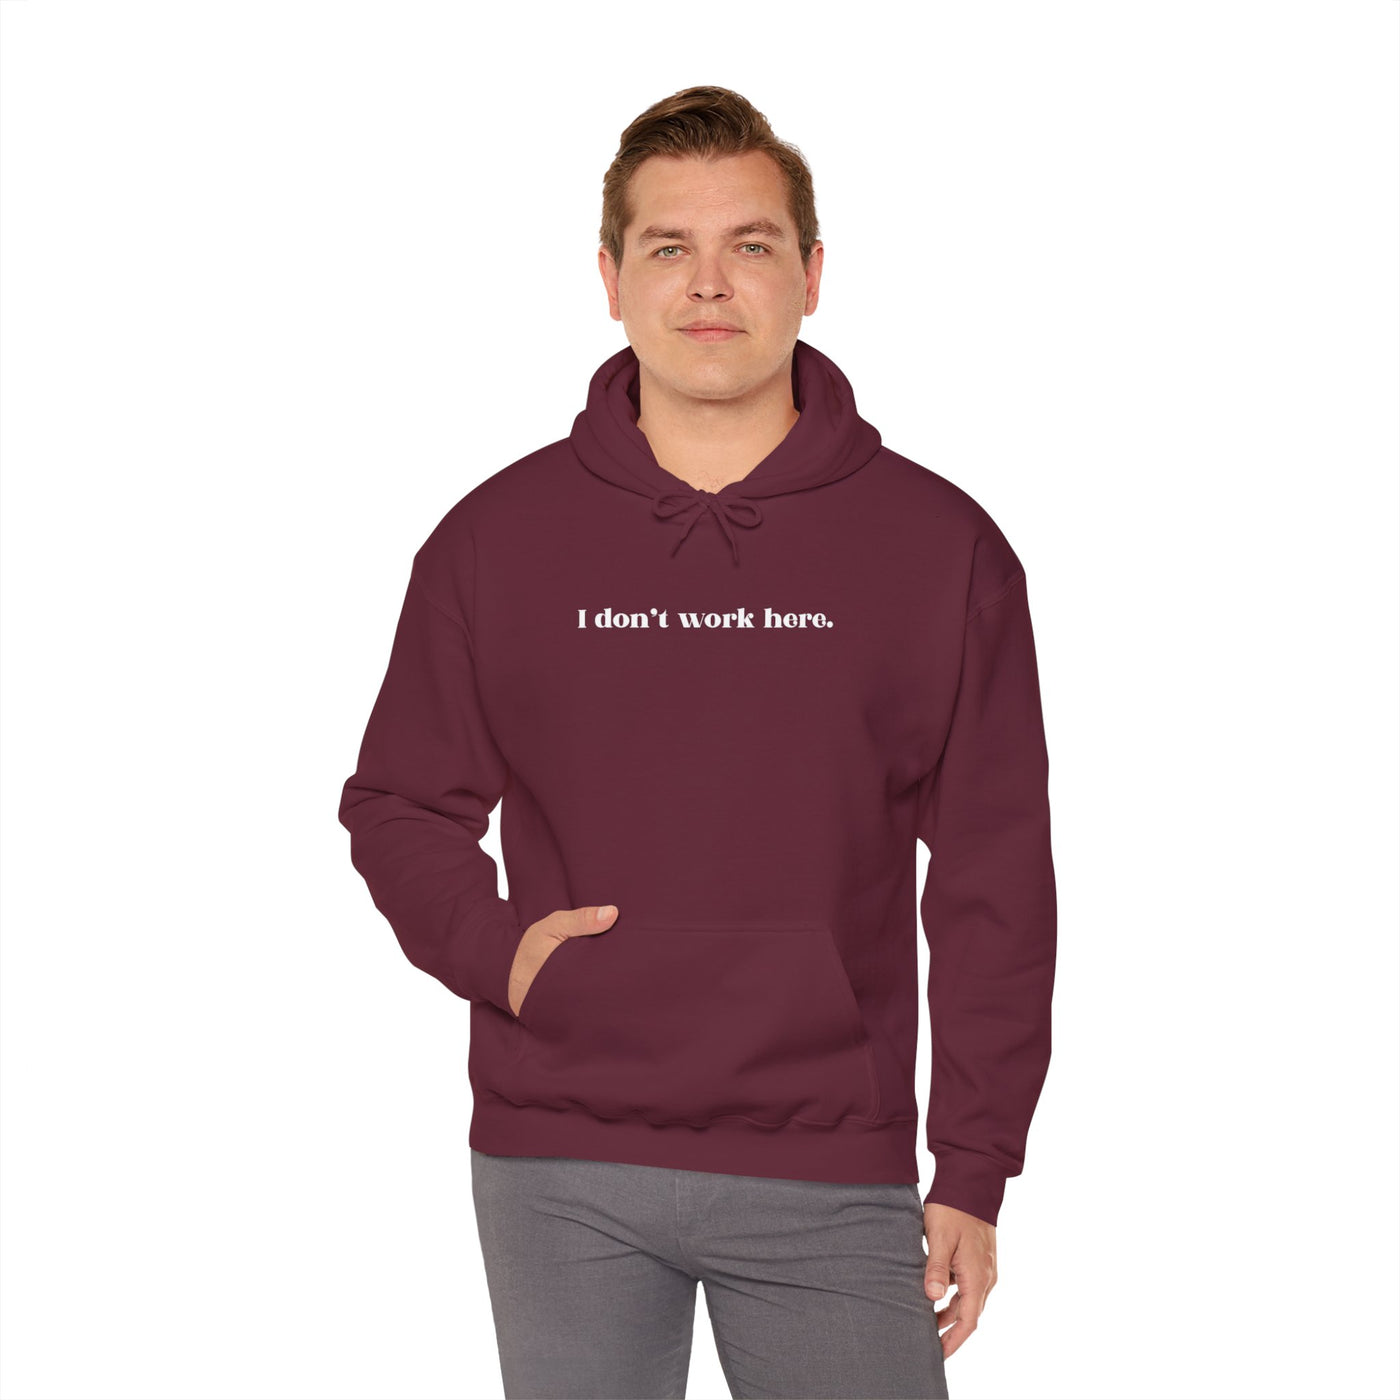 I Don't Work Here Unisex Hoodie